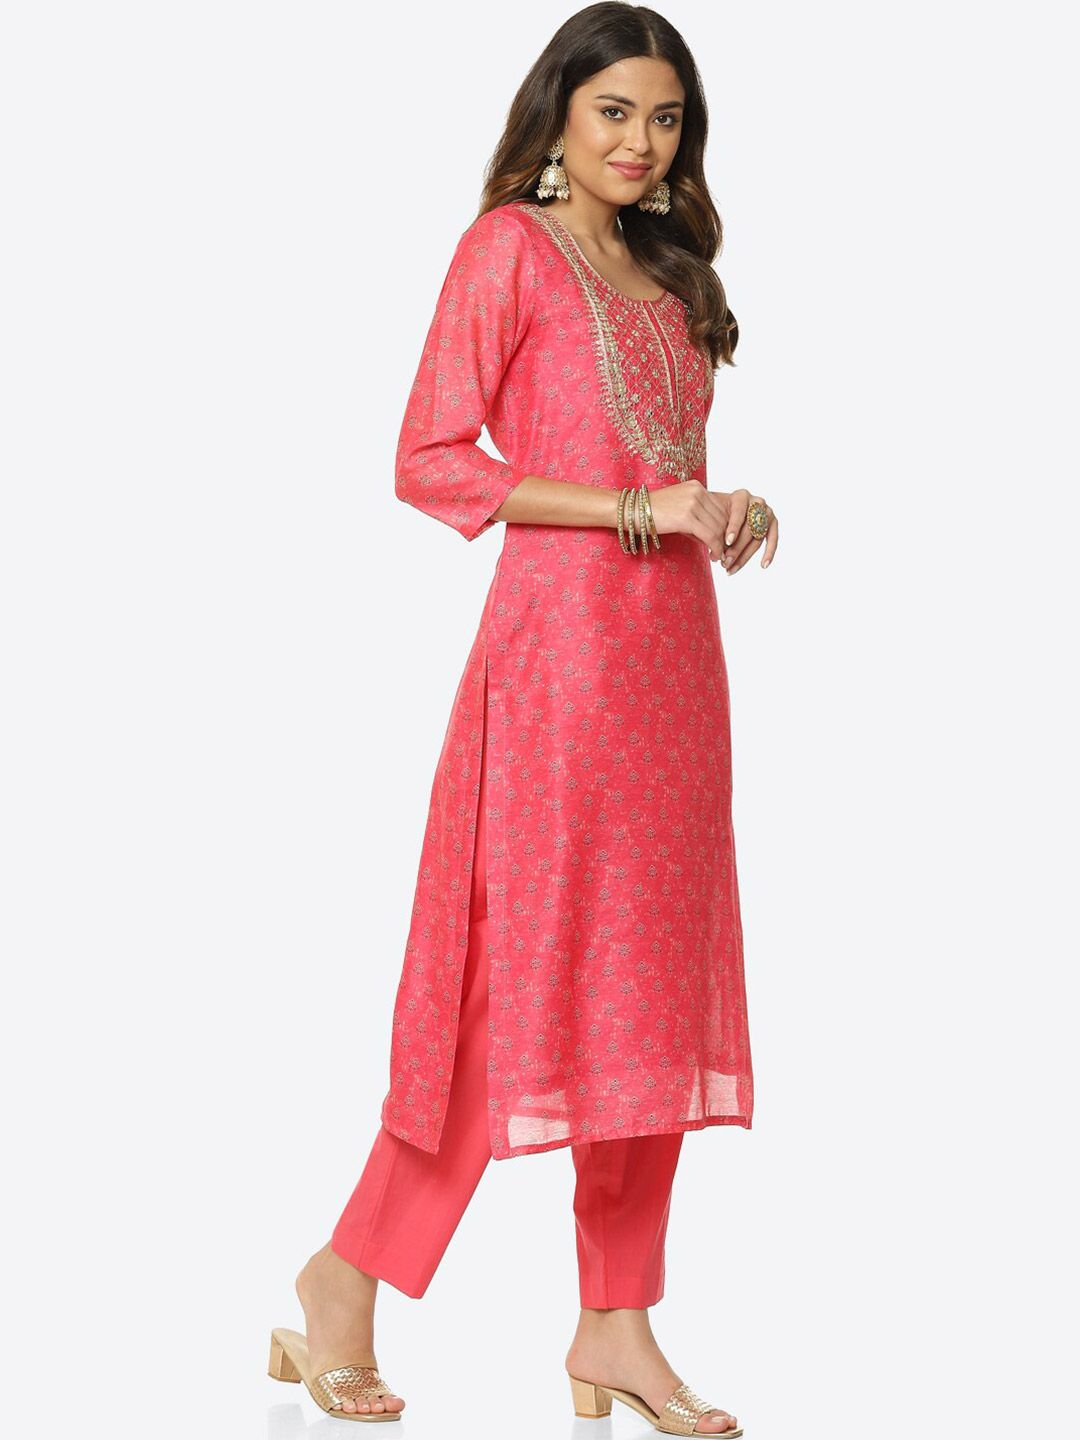 Meena Bazaar Pink & Silver-Toned Embroidered Unstitched Dress Material Price in India